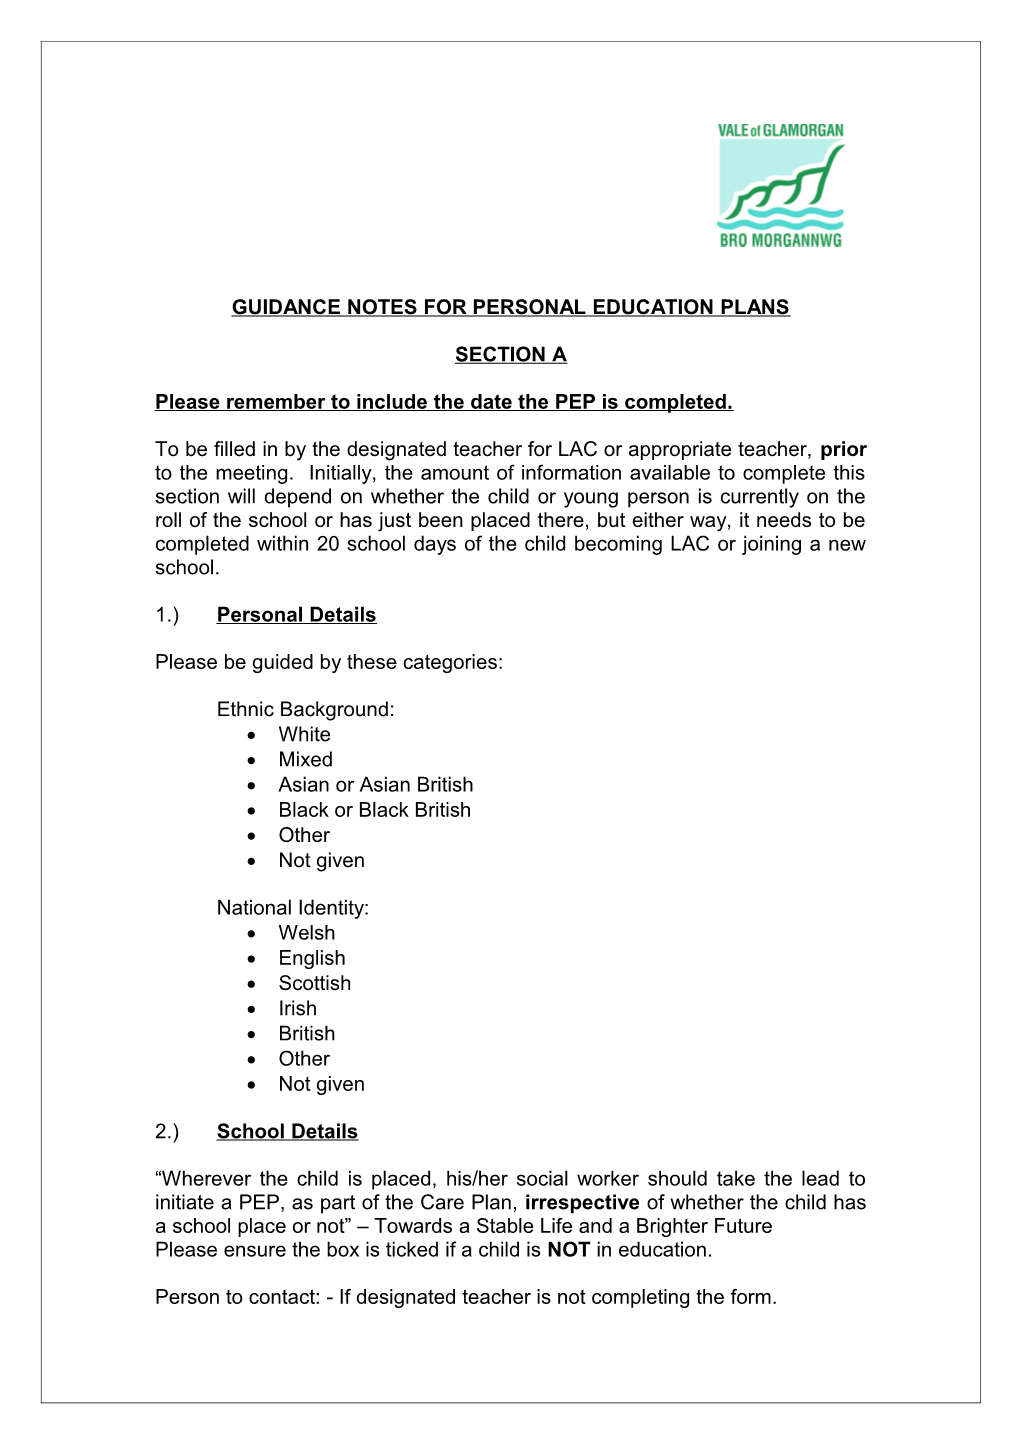 Guidance Notes for Personal Education Plans 2009